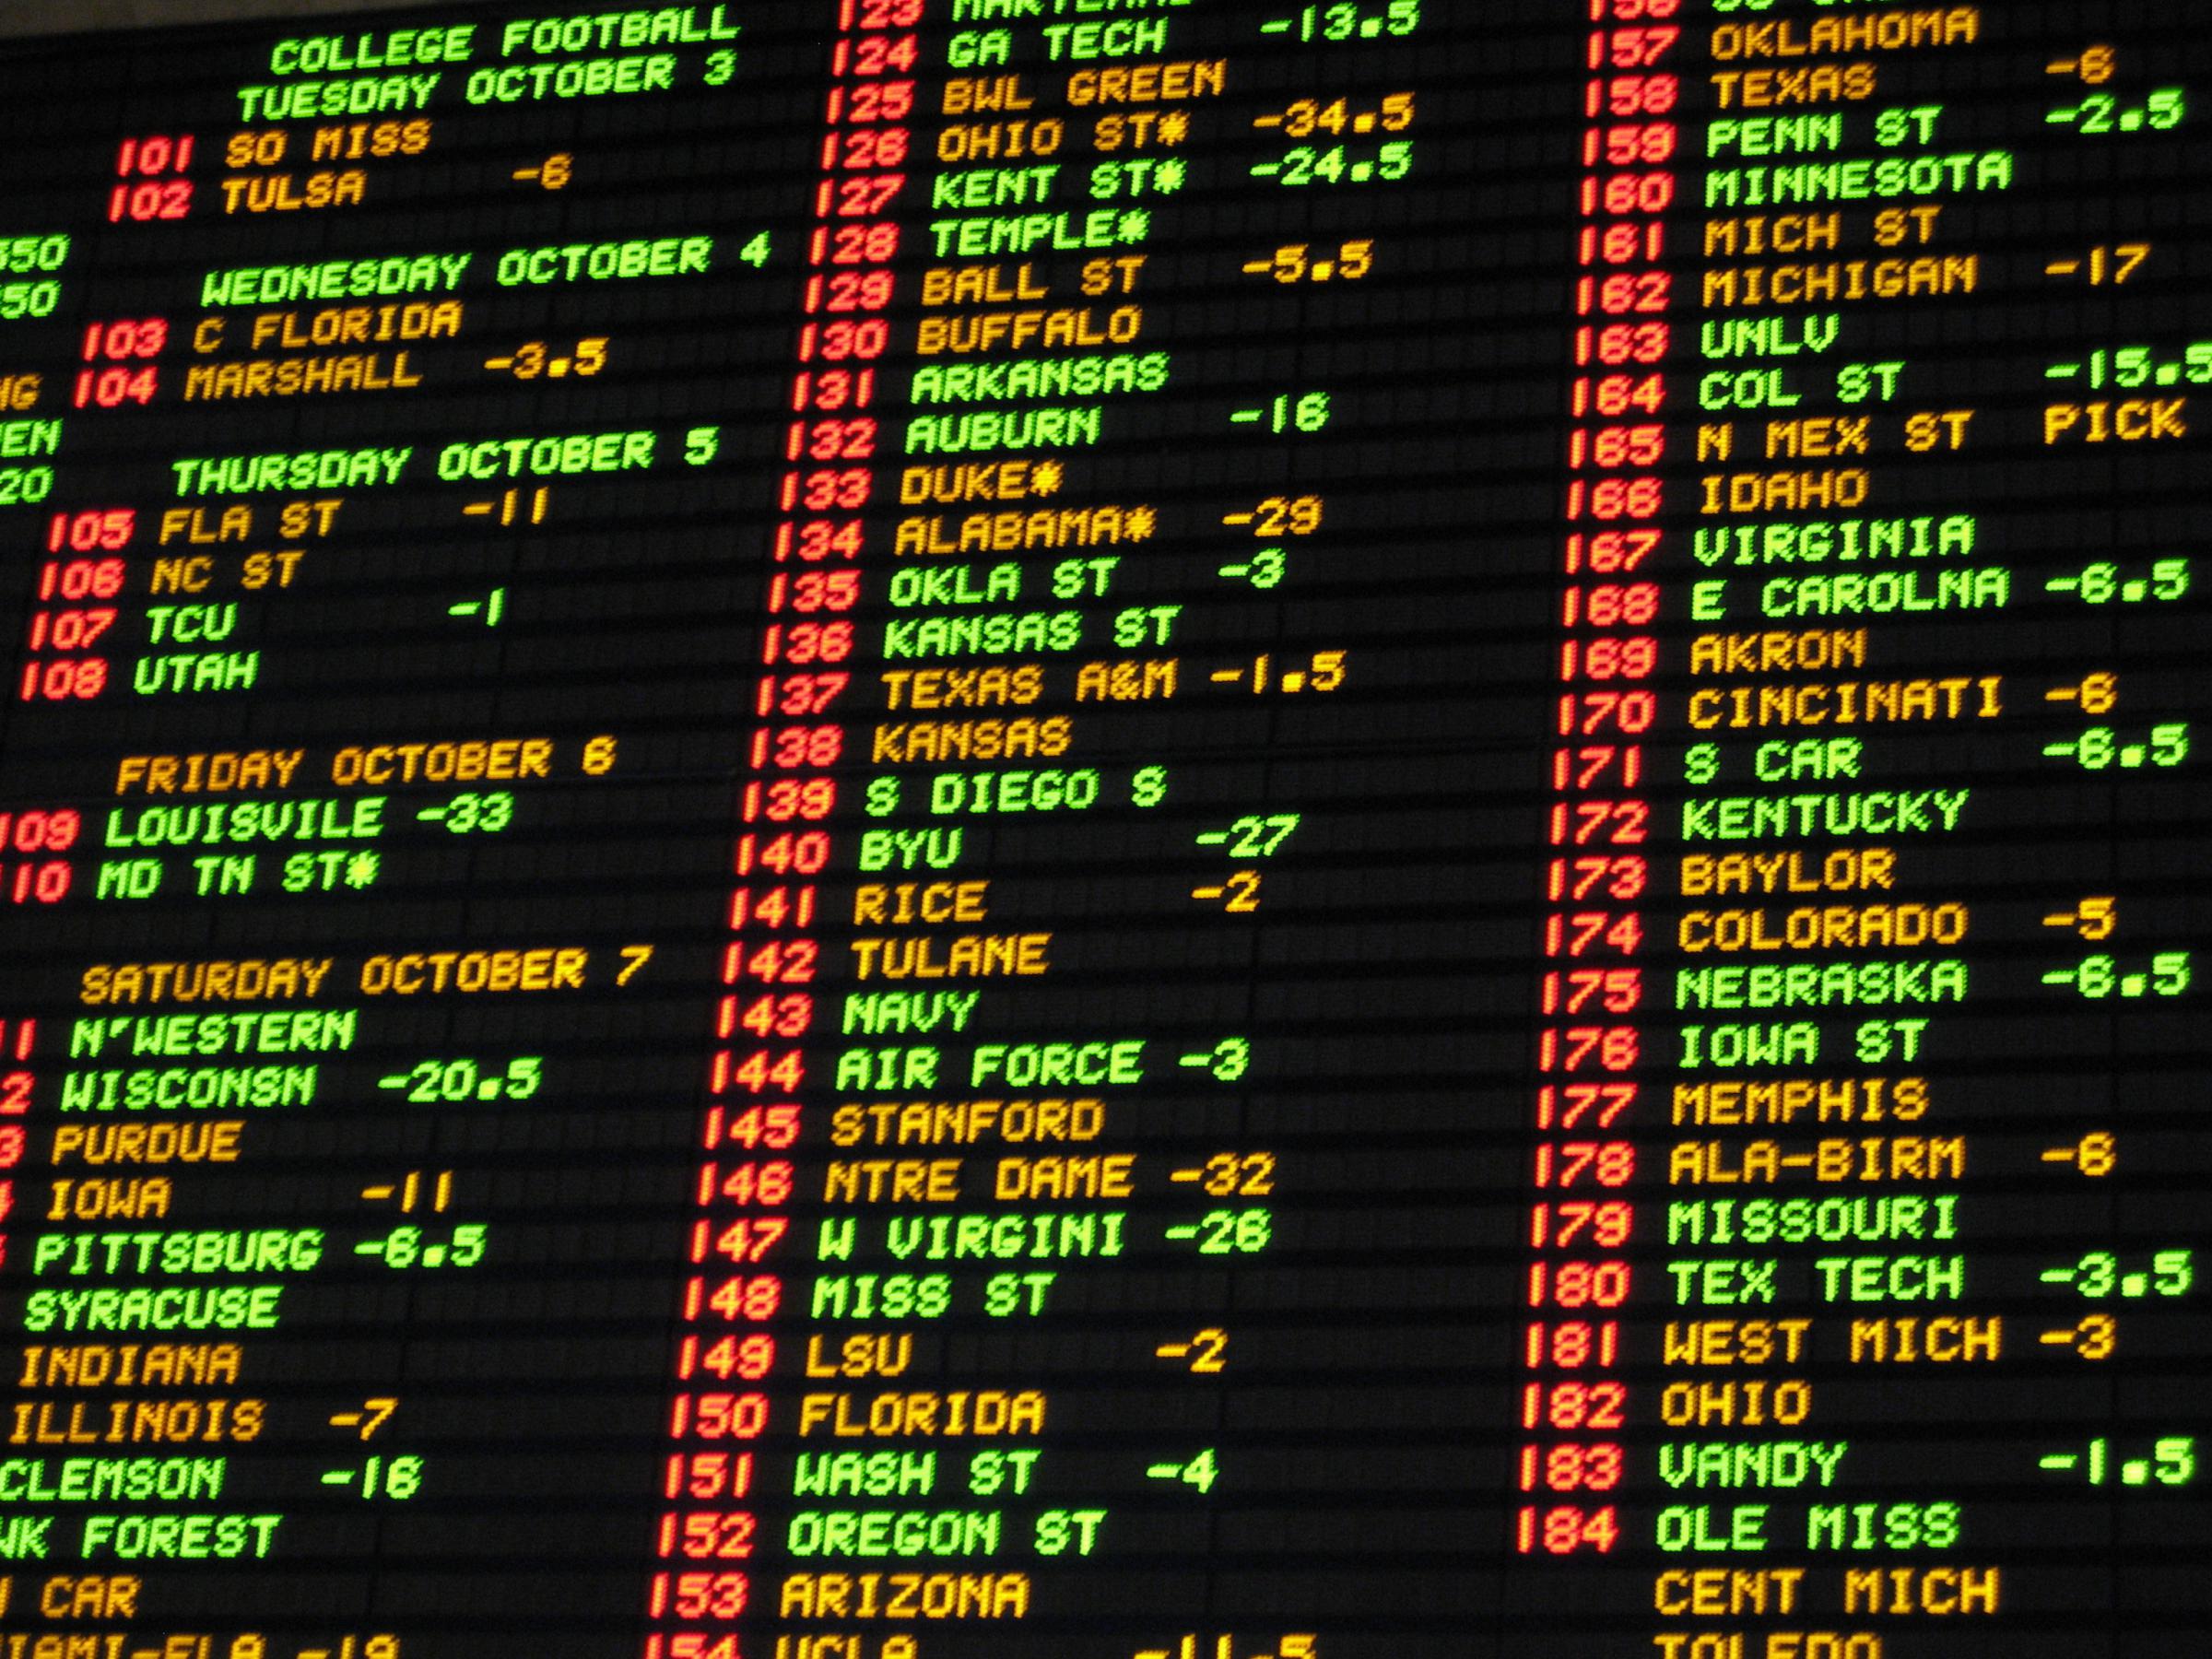 Proponents of Florida gambling initiatives aim to submit signatures by Dec. 30